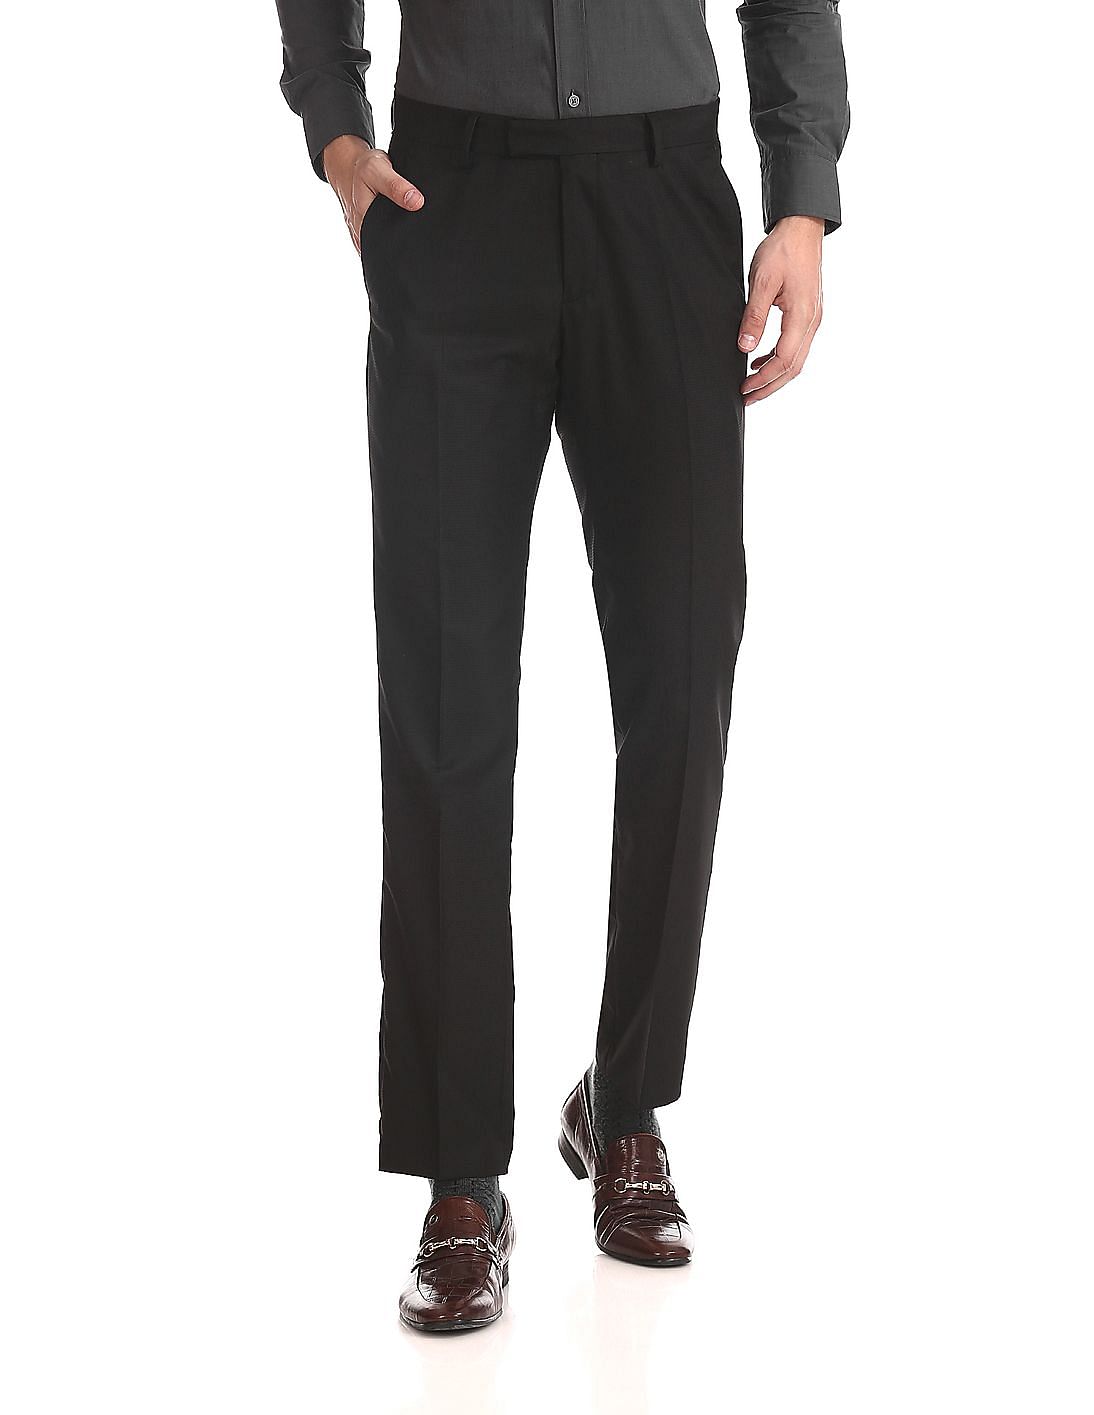 Buy Men Tailored Regular Fit Patterned Trousers online at NNNOW.com